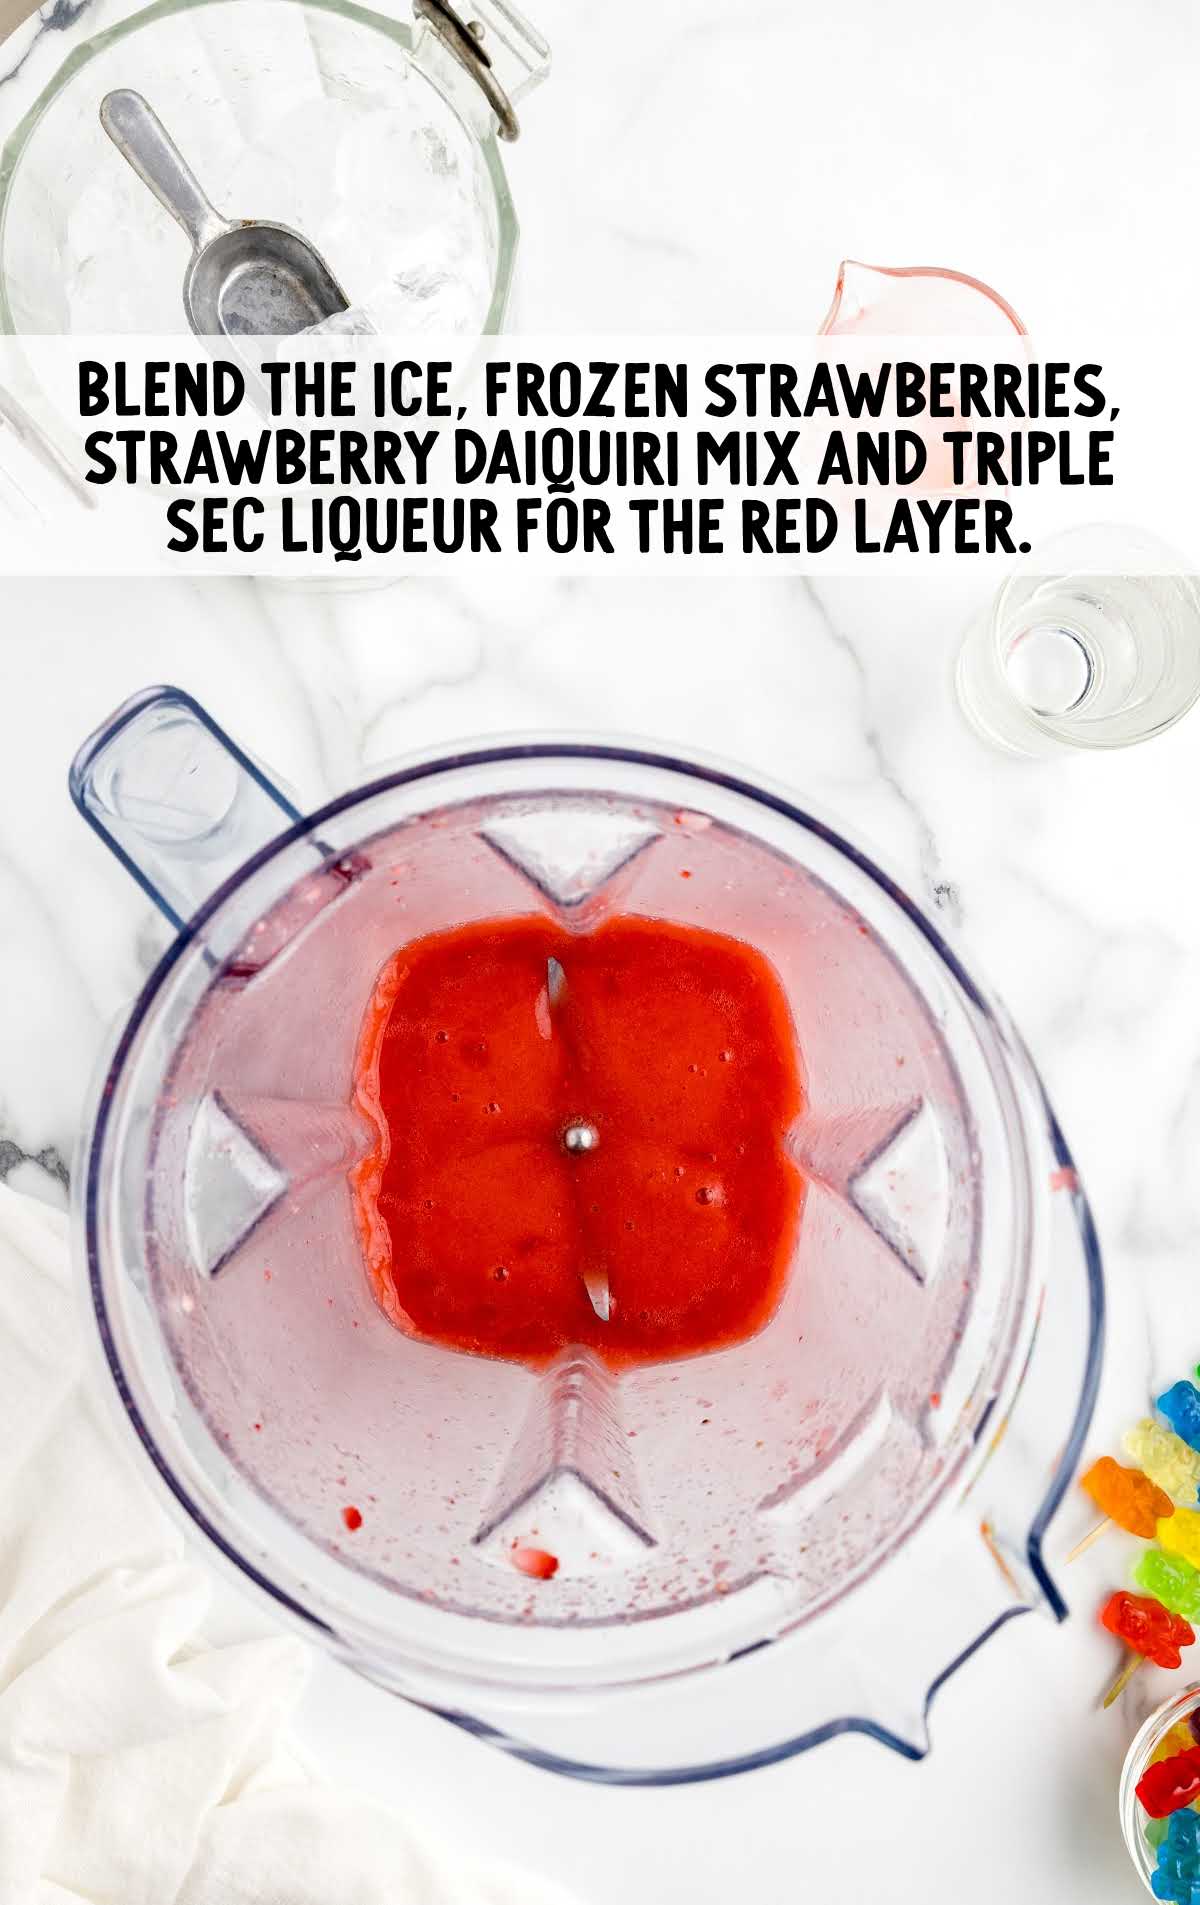 ice, frozen strawberries, strawberry daiquiri mix and triple sec liqueur blended in a blender